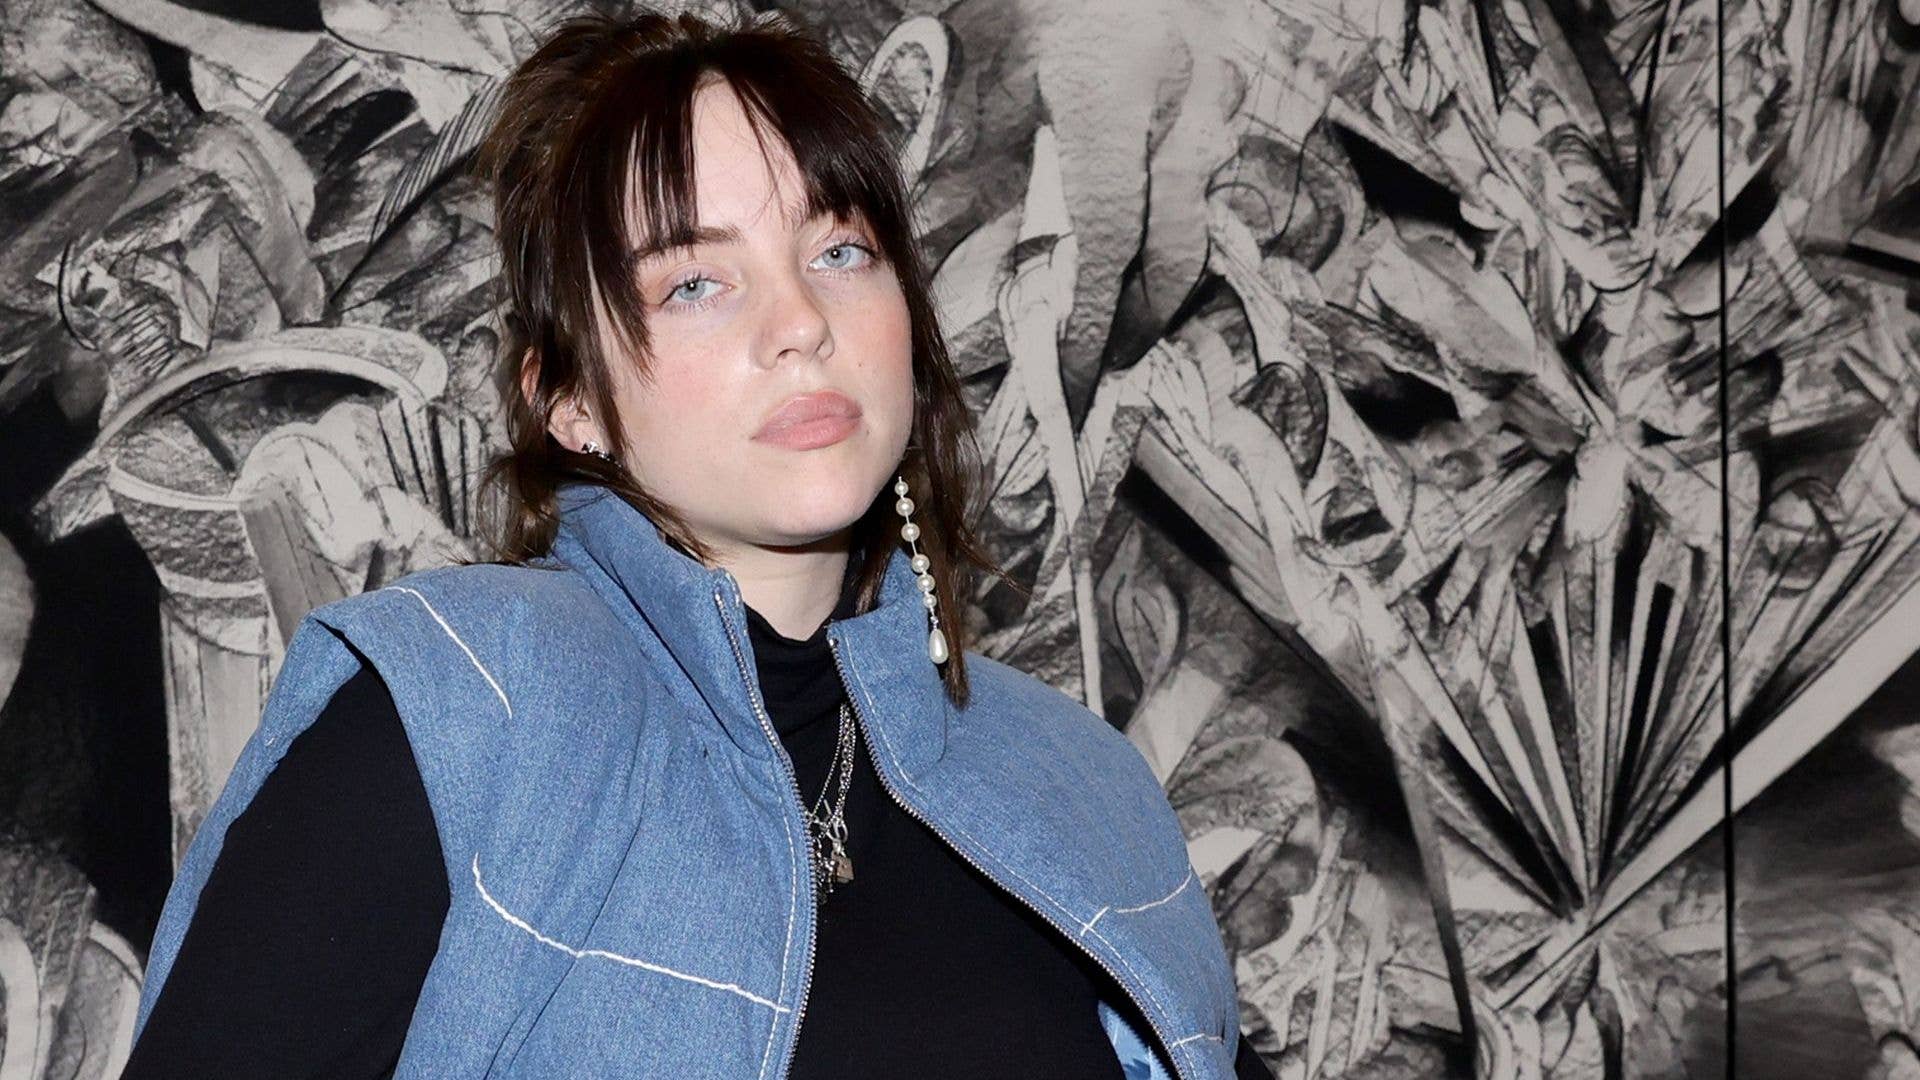 Billie Eilish attends the “Artists Inspired by Music: Interscope Reimagined” Art Exhibit